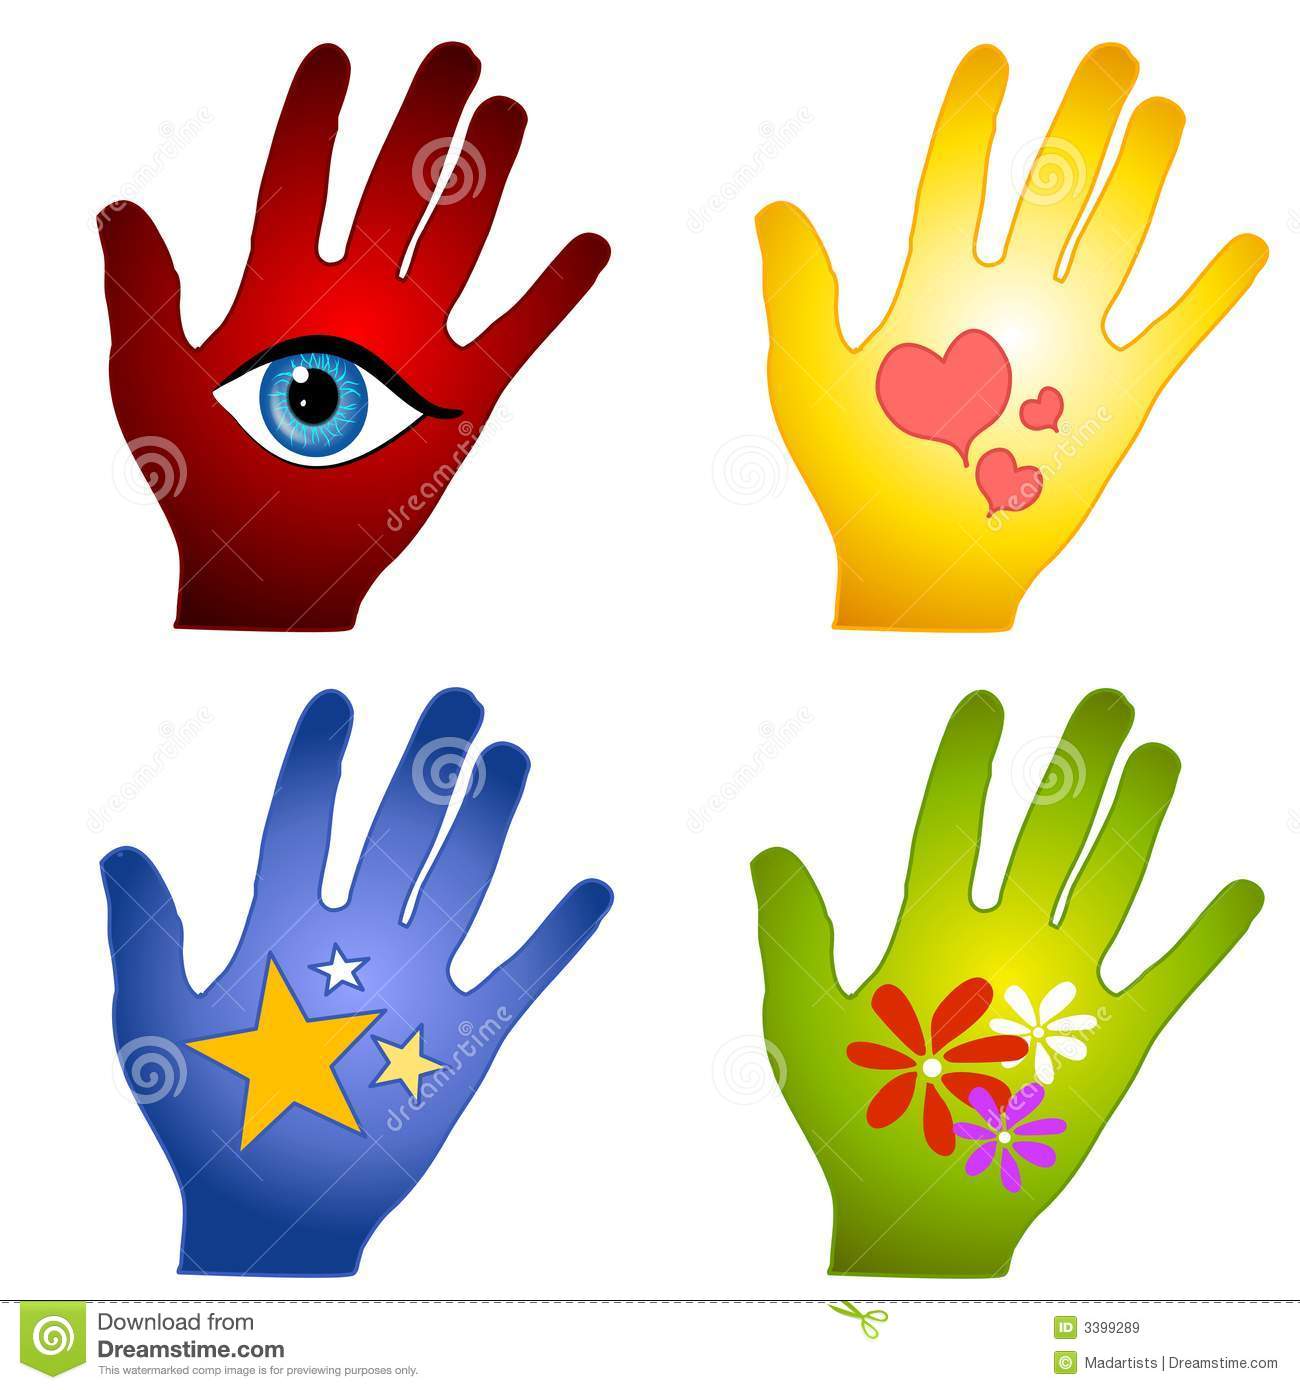 free clipart images helping hands - photo #45